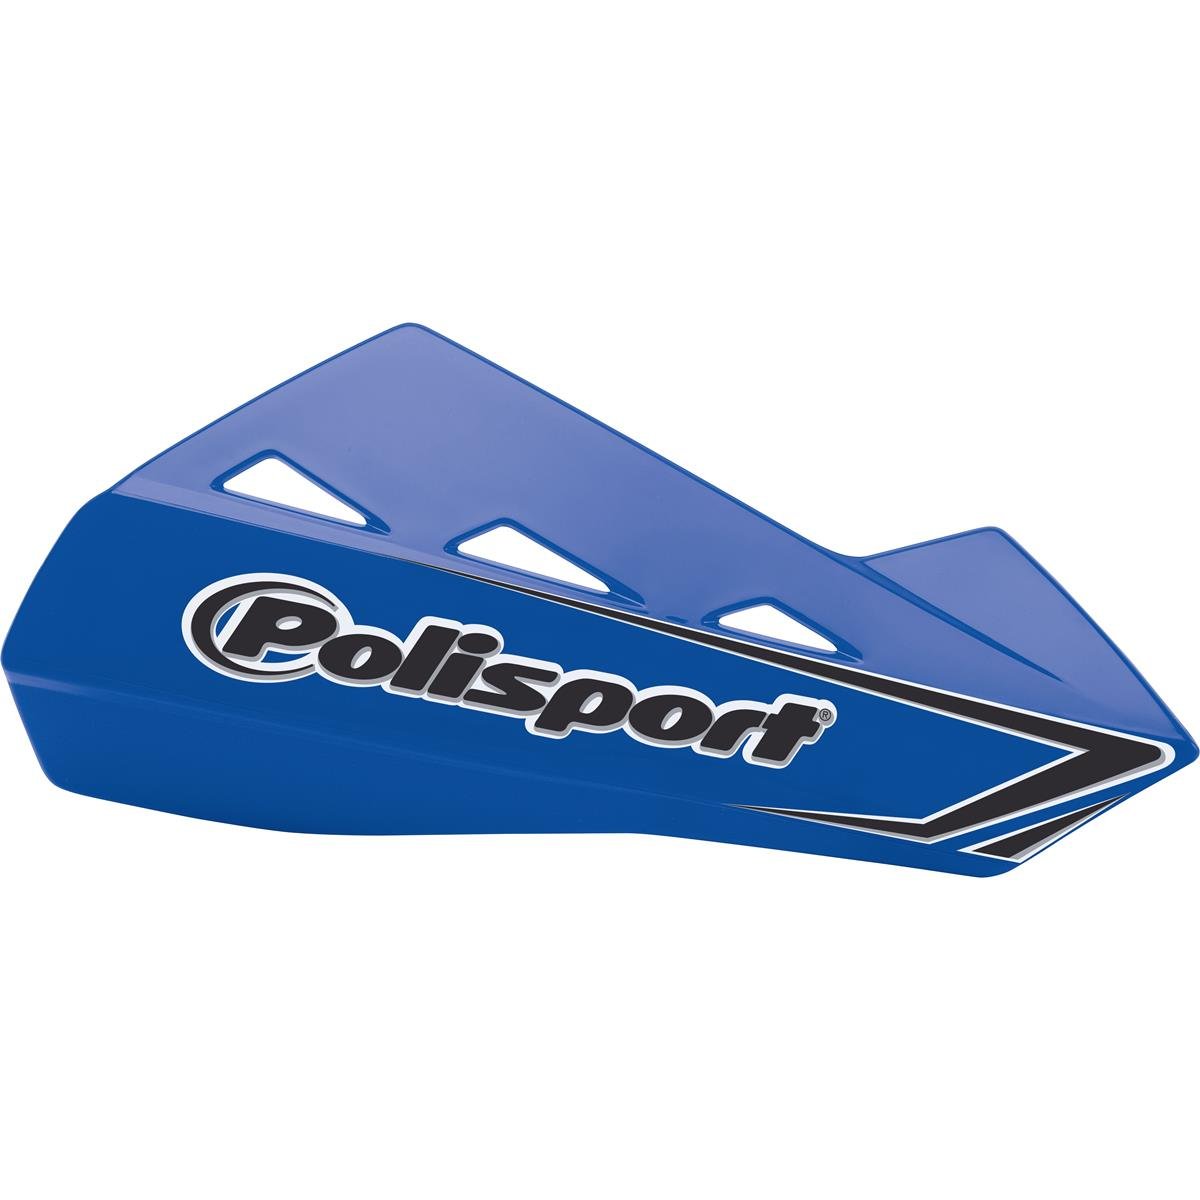 Polisport Handguards Qwest with Plastic Mounting Kit, Blue